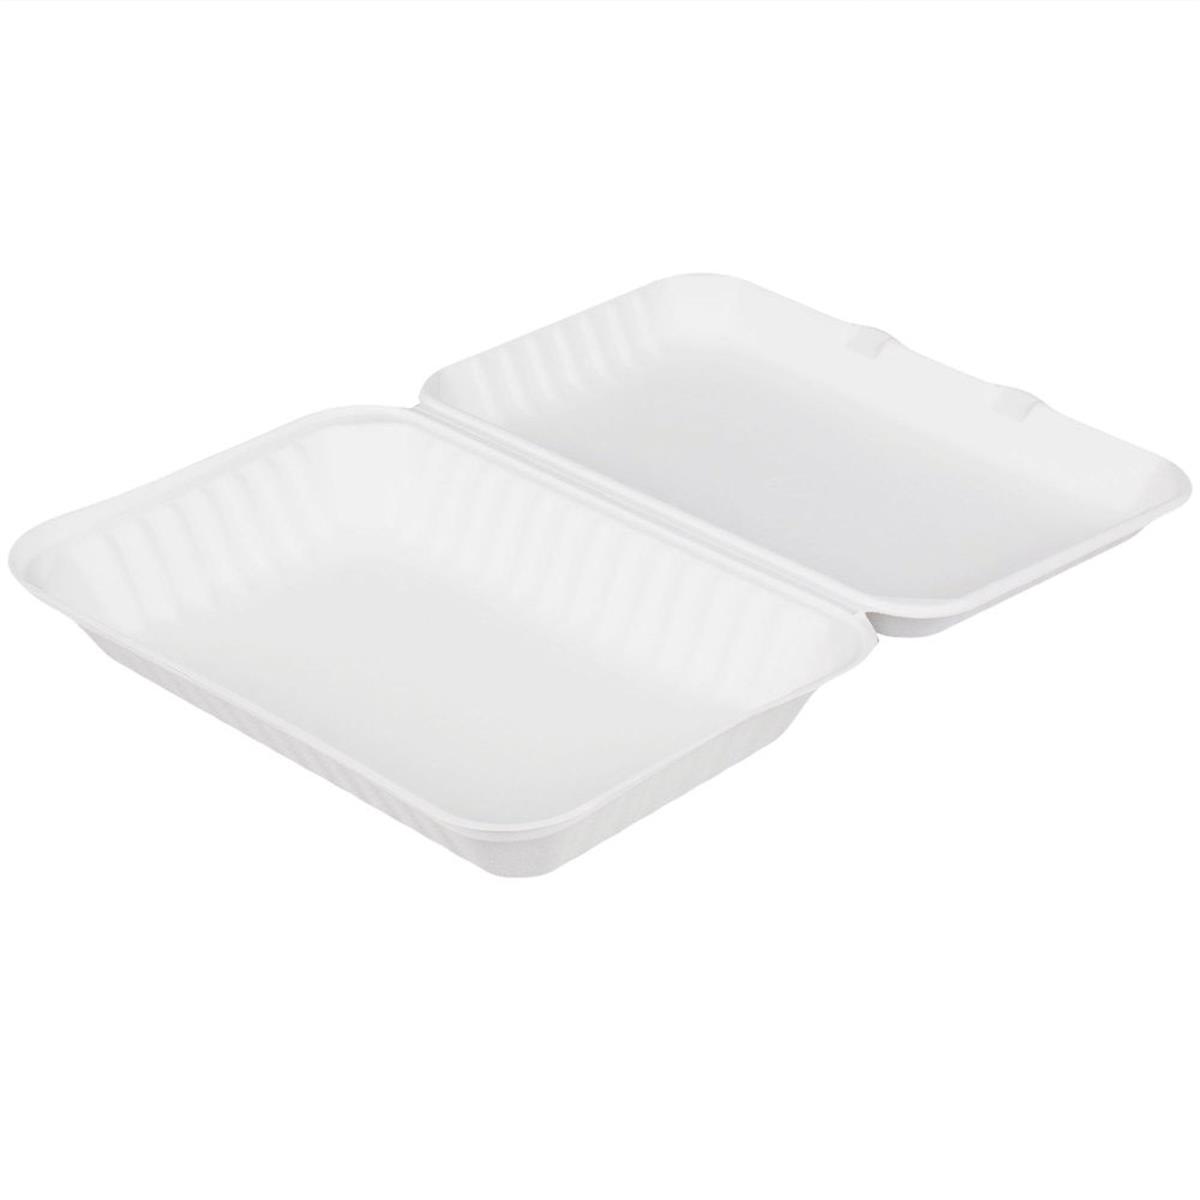 Tw-boo-011 Pe 9 X 9 X 3 In. Bagasse Evolution Hinged Container, White